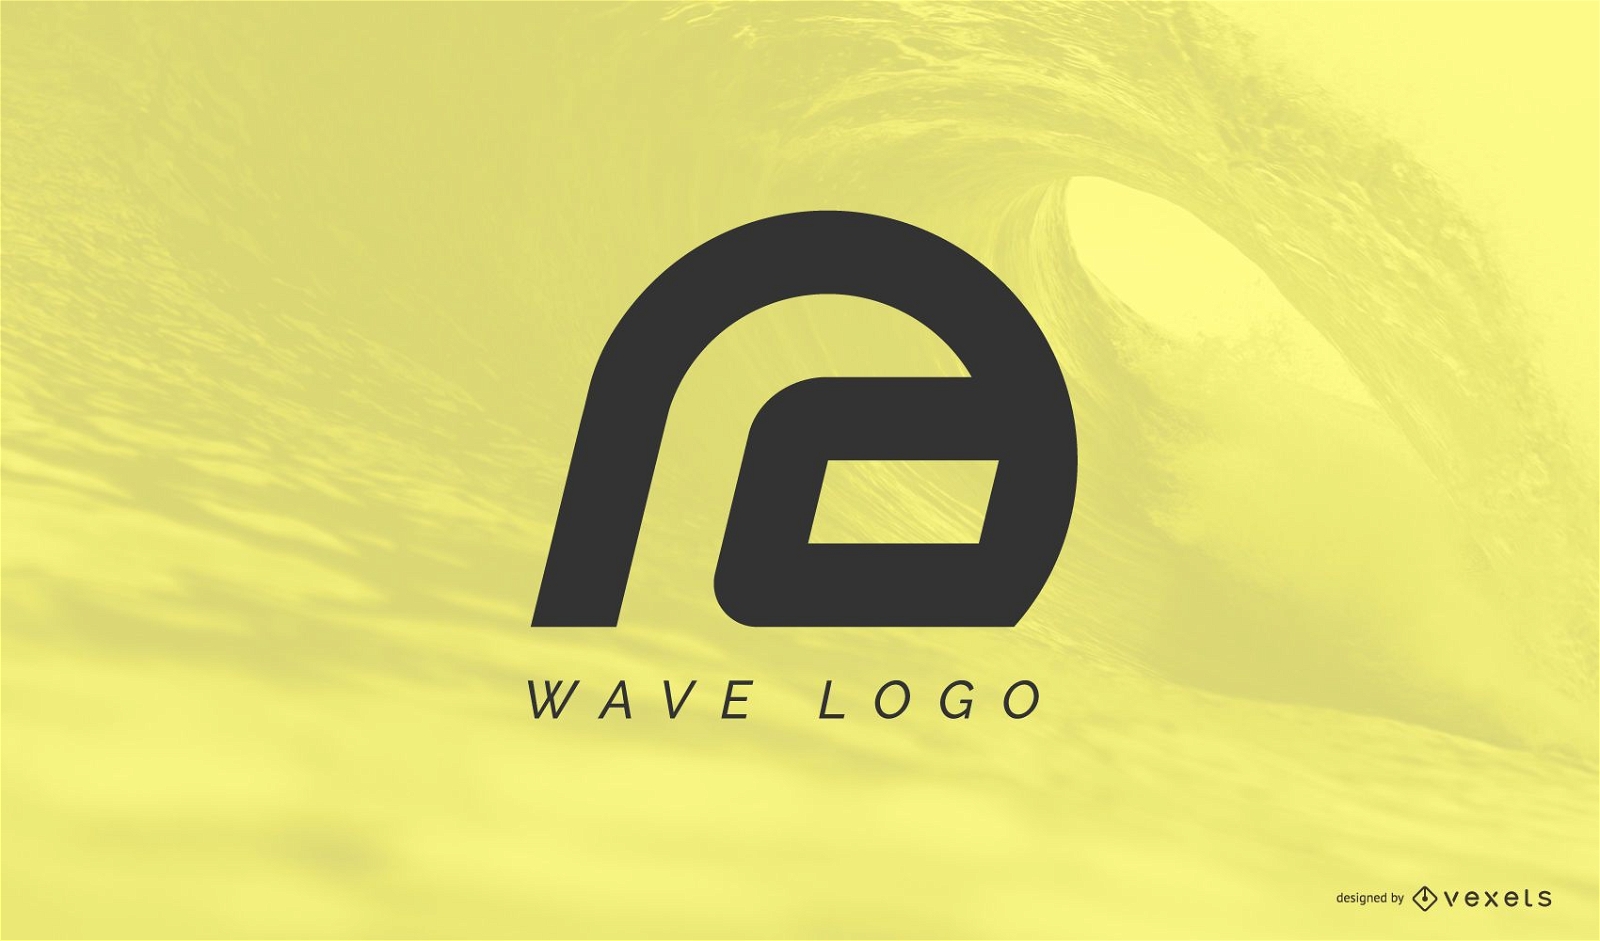 Abstract wave logo template